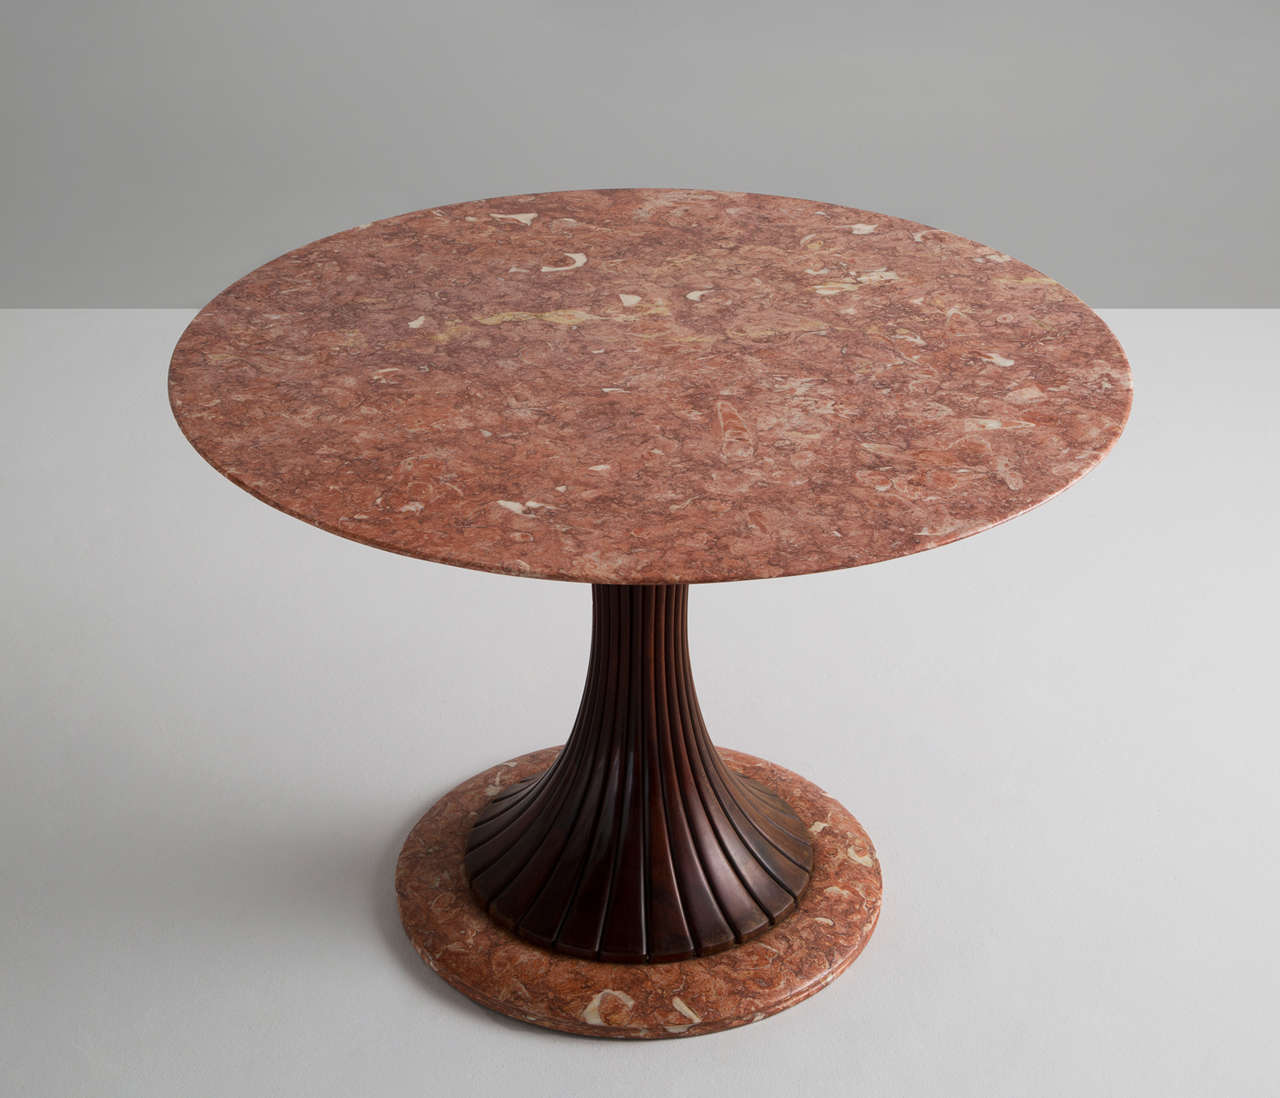 A very nice dining table by Osvaldo Borsani for Arredamento Borsani.

Osvaldo Borsani is known for his modernist designs at Tecno Milano. Before he began Tecno with his twin brother, Osvaldo designed furniture at his fathers cabinetry Atelier